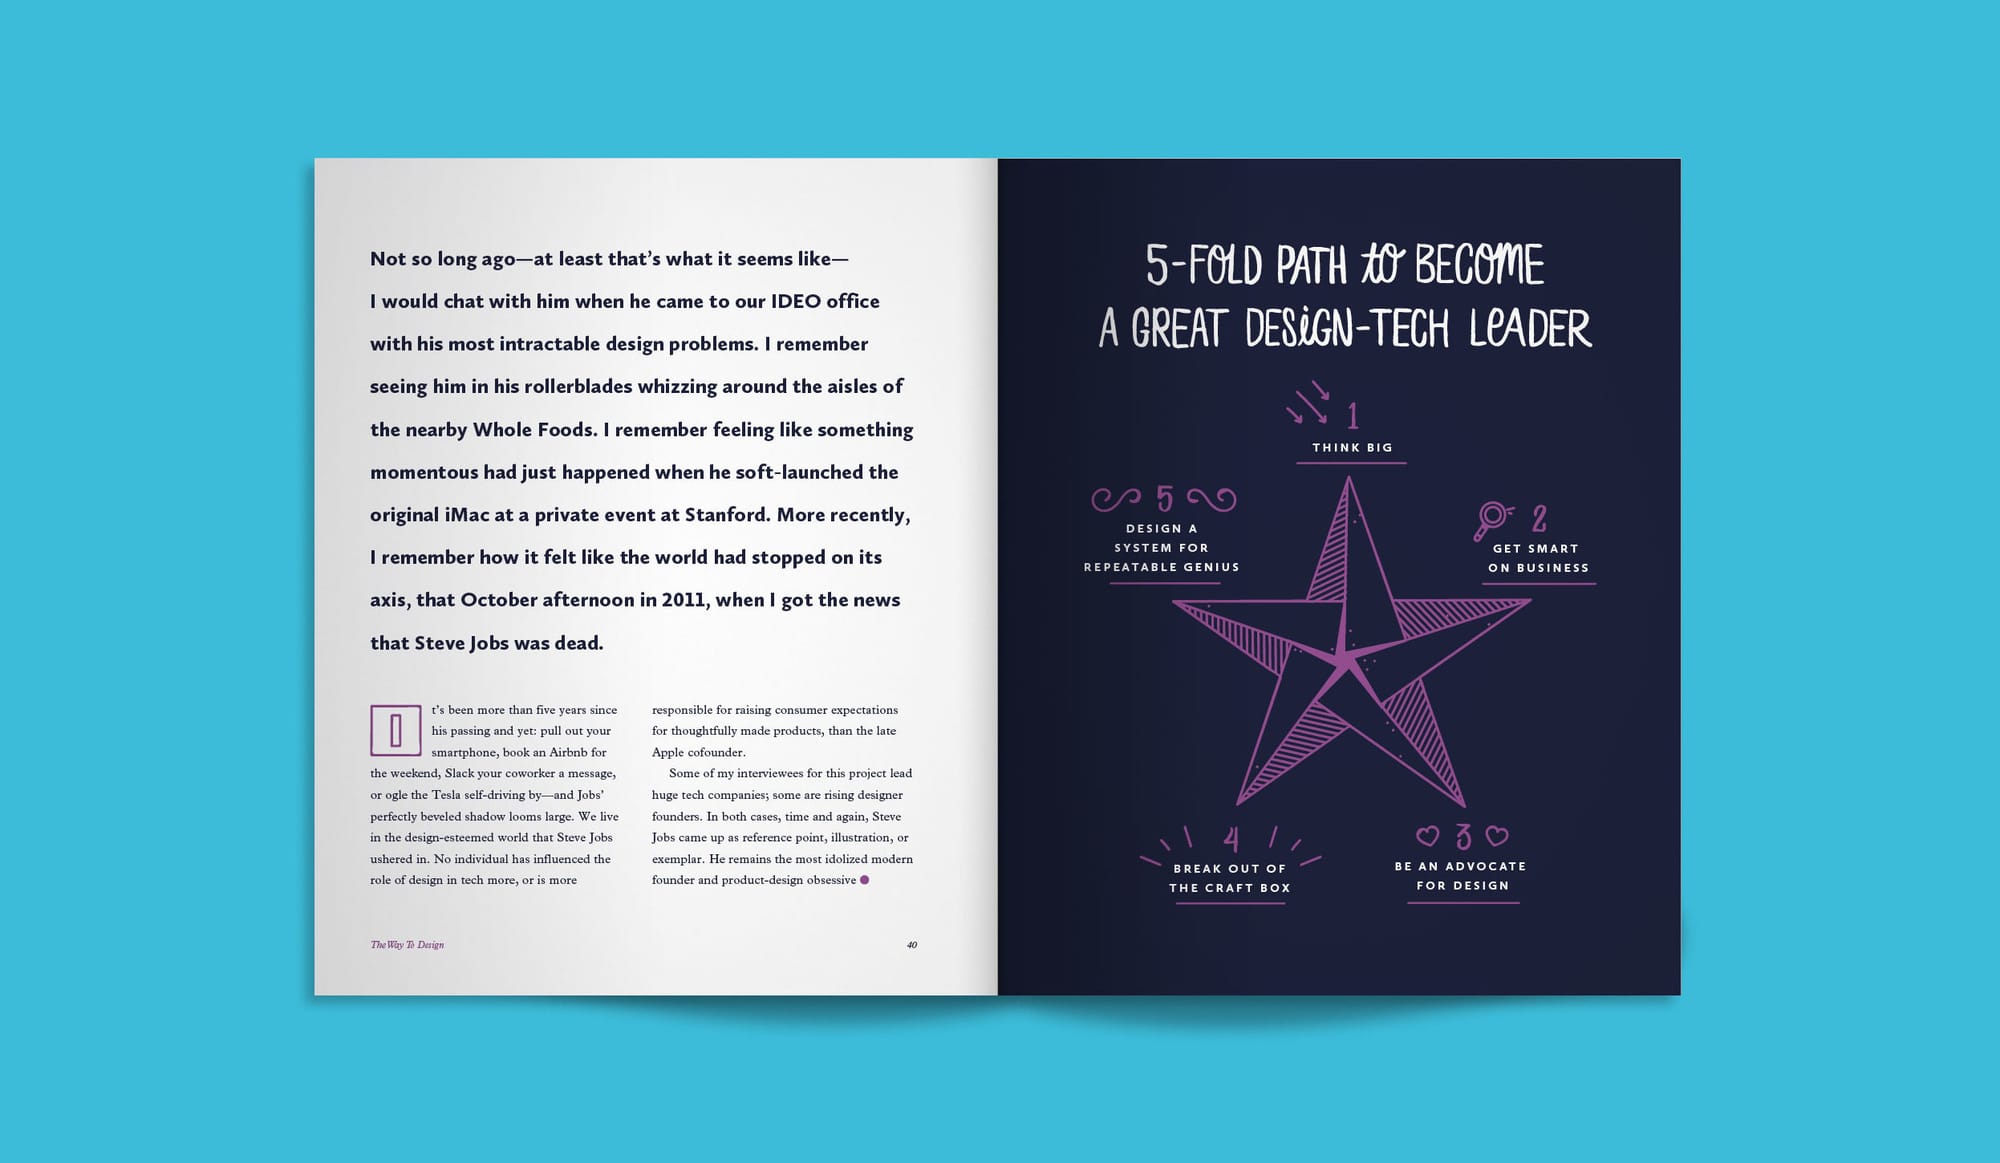 The Way To Design book spread